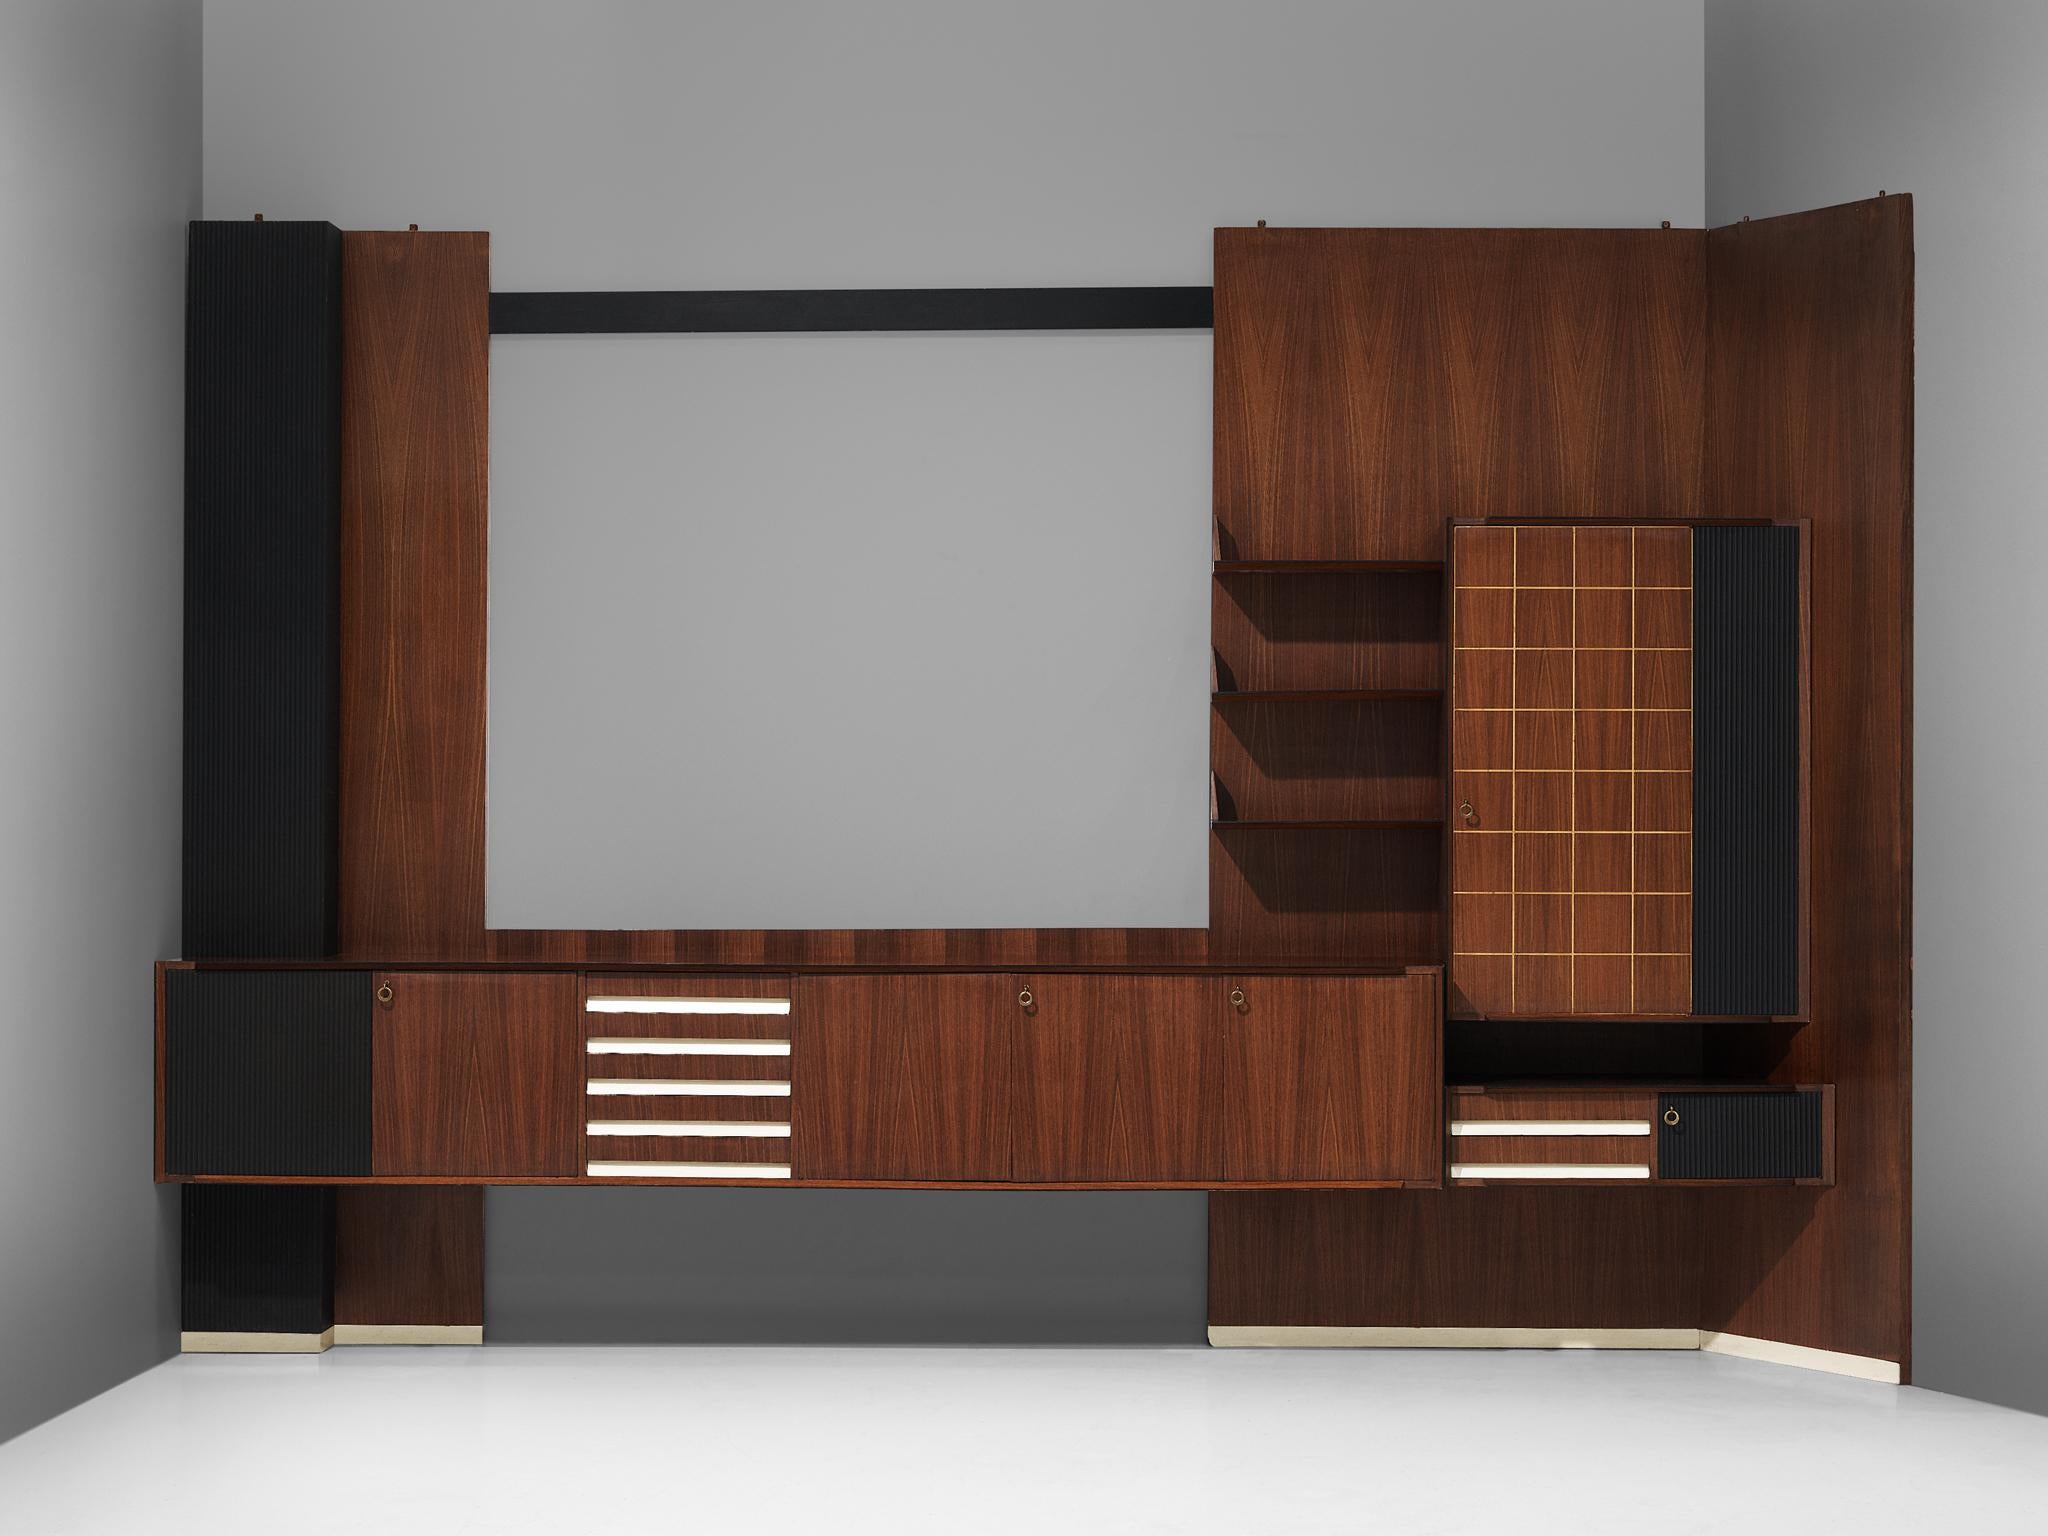 Vittorio Dassi, wall unit, walnut, Italy, 1950s.

A large wall unit in mahogany, designed by Vittorio Dassi. The cabinet is probably costume made and features drawers and several shelves, which offers plenty of storage space. There are different